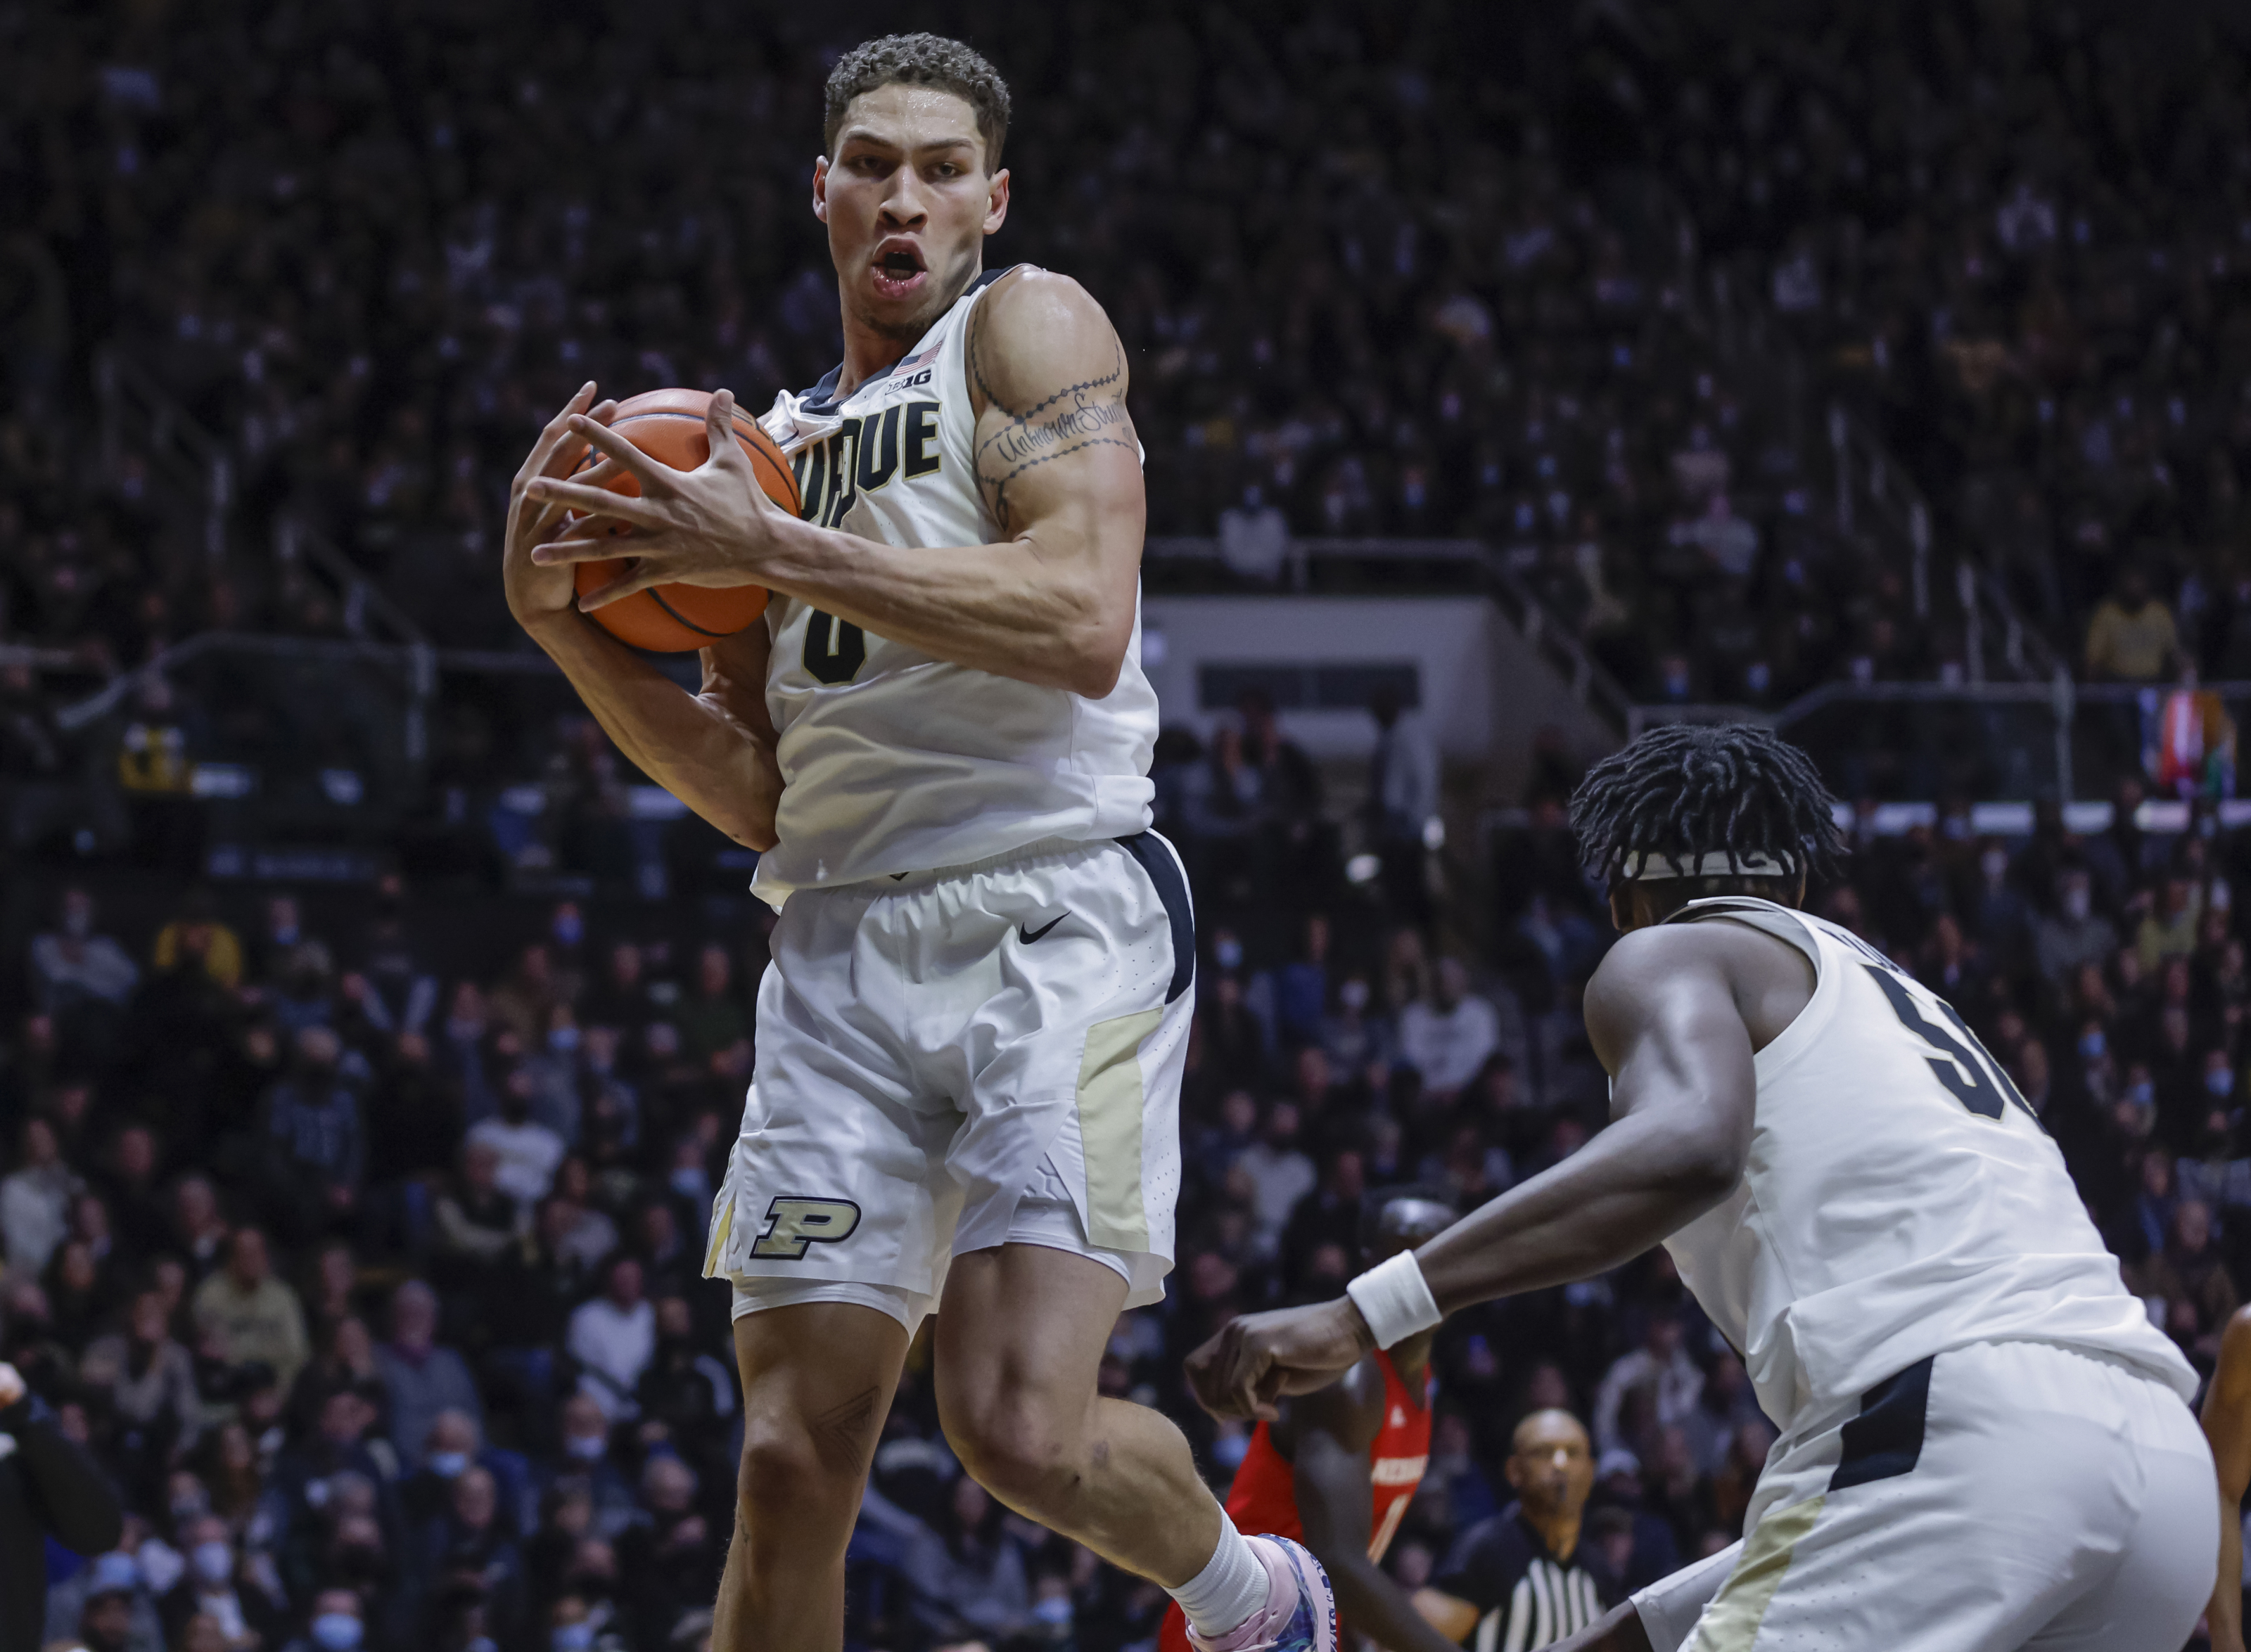 Purdue Game Tonight Purdue vs Indiana Line, Predictions, Odds, and TV Channel for College Basketball Jan